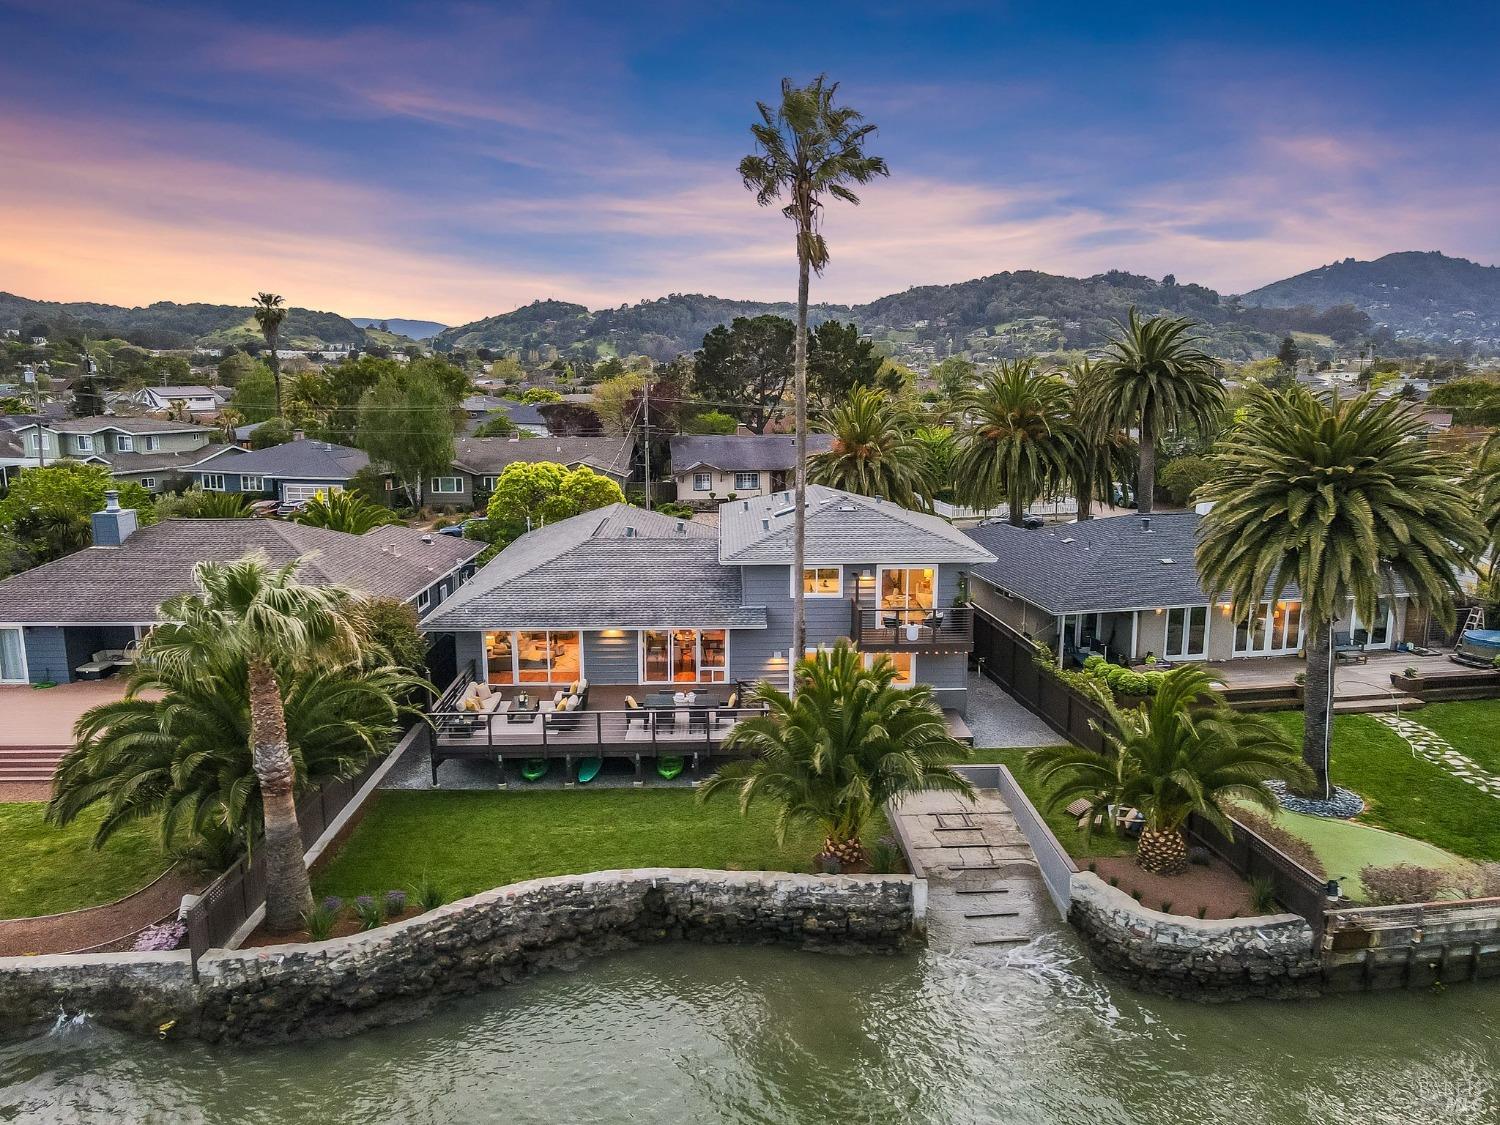 Rarely available, updated and expanded waterfront home in Corte Madera's coveted Mariner Cove neighborhood. World class water views and a private SF Bay boat ramp for kayaking, boating and paddle boarding from your backyard. This stunning home features beautiful wood floors, an updated open kitchen with water views seamlessly flowing to dining and living rooms, and connecting to the backyard via sliding glass doors. The flexible floor plan offers 3 bedrooms on the lower level, including a spacious en suite bedroom (was previously 2 br's, could be again). The 4th bedroom is a legal ADU and is located upstairs with interior access and its own private exterior entry as well. A full kitchen, bath and laundry make it great as an au pair suite, granny/ in-law unit, rental or work from home space as desired. Incredible water views from kitchen, living room and balcony. The lush grounds include level lawn, spacious deck, mature palm trees and gardening areas offering fantastic spaces to dine al fresco, bbq with friends and family or just enjoy the views of the water and abundant marine and bird life. Excellent school district, just down the block from the highly regarded Cove elementary school. Great SF commute location. This is the good life. Come home to Corte Madera.